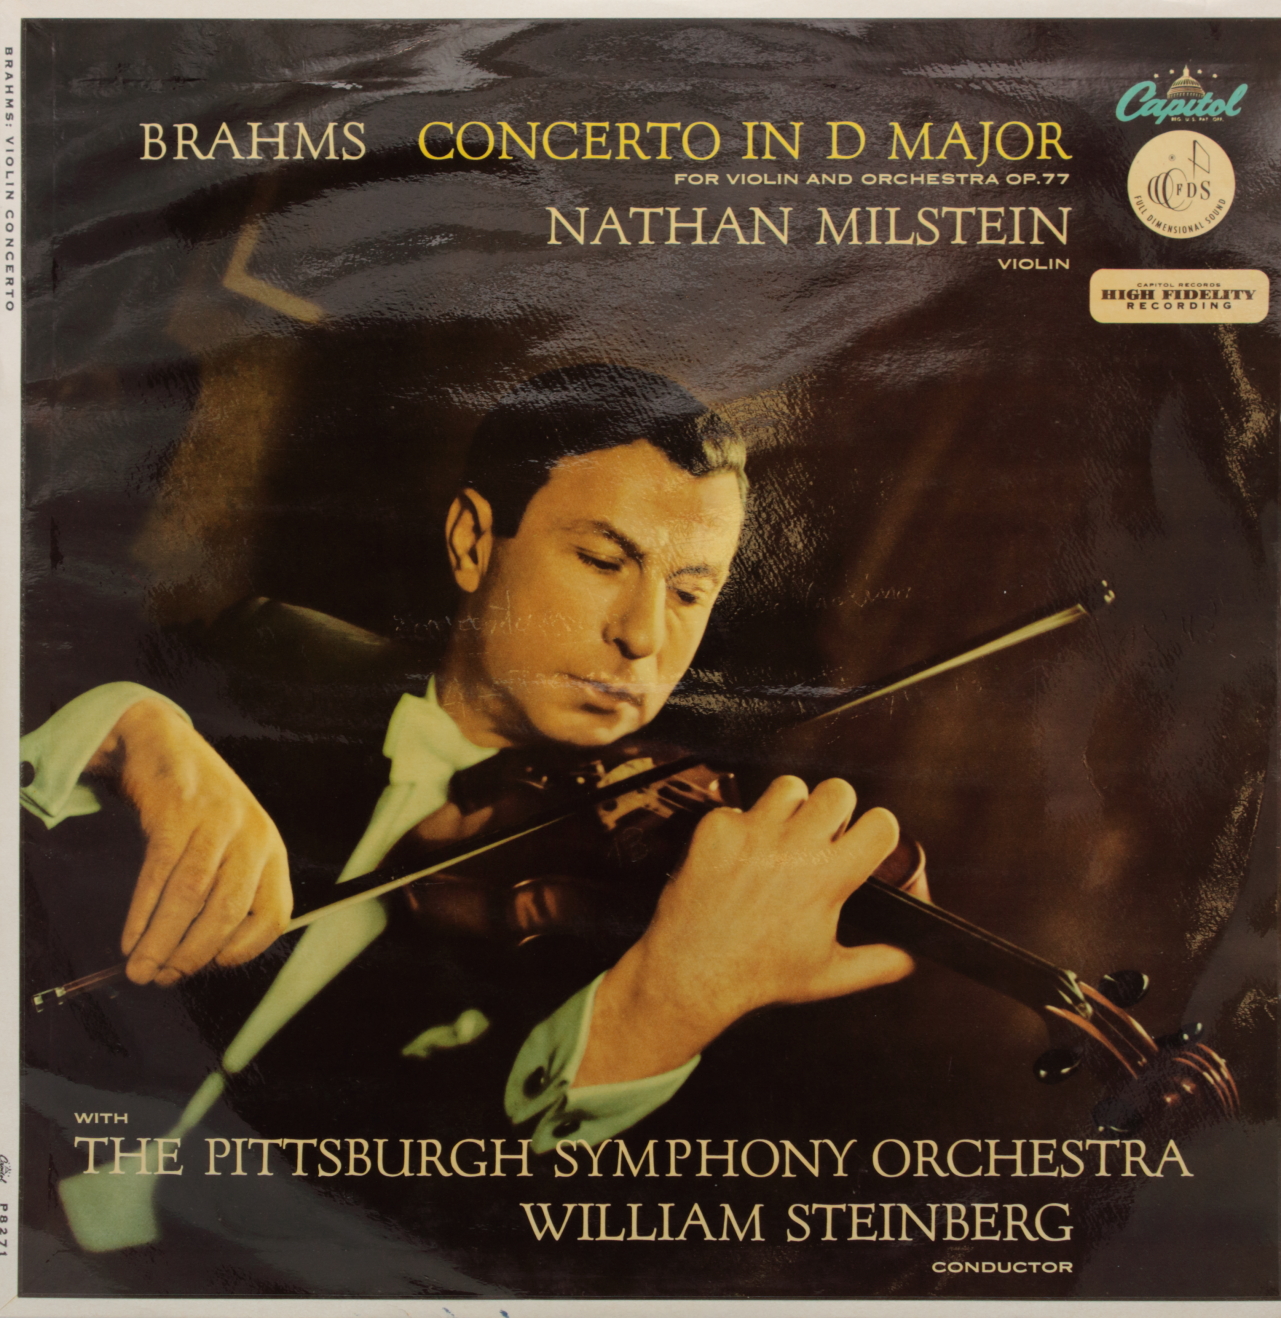 Brahms: Concerto in D major for Violin and Orchestra Op. 77